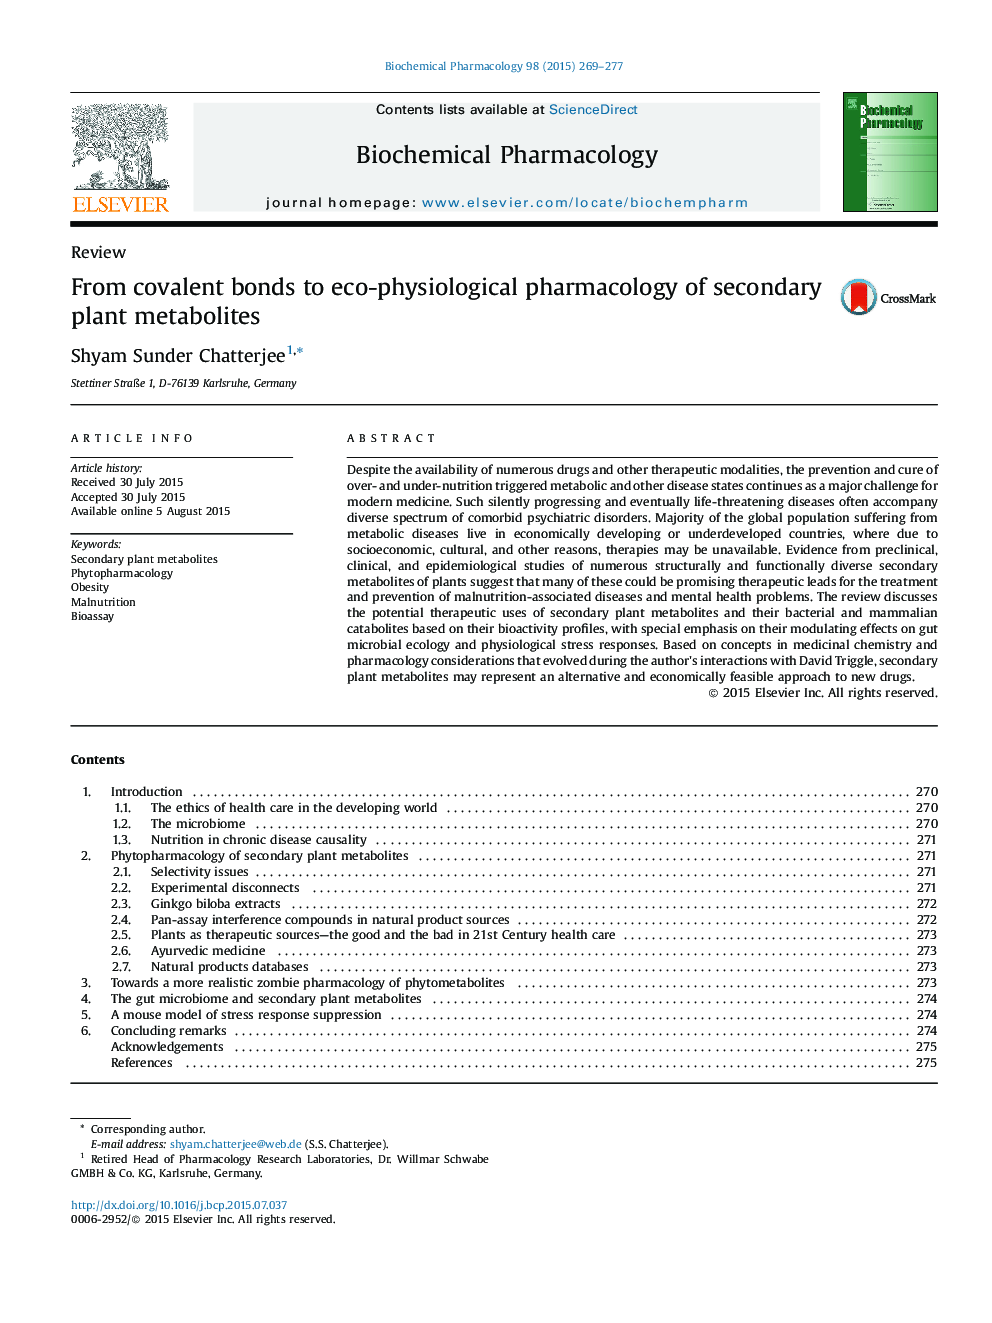 From covalent bonds to eco-physiological pharmacology of secondary plant metabolites